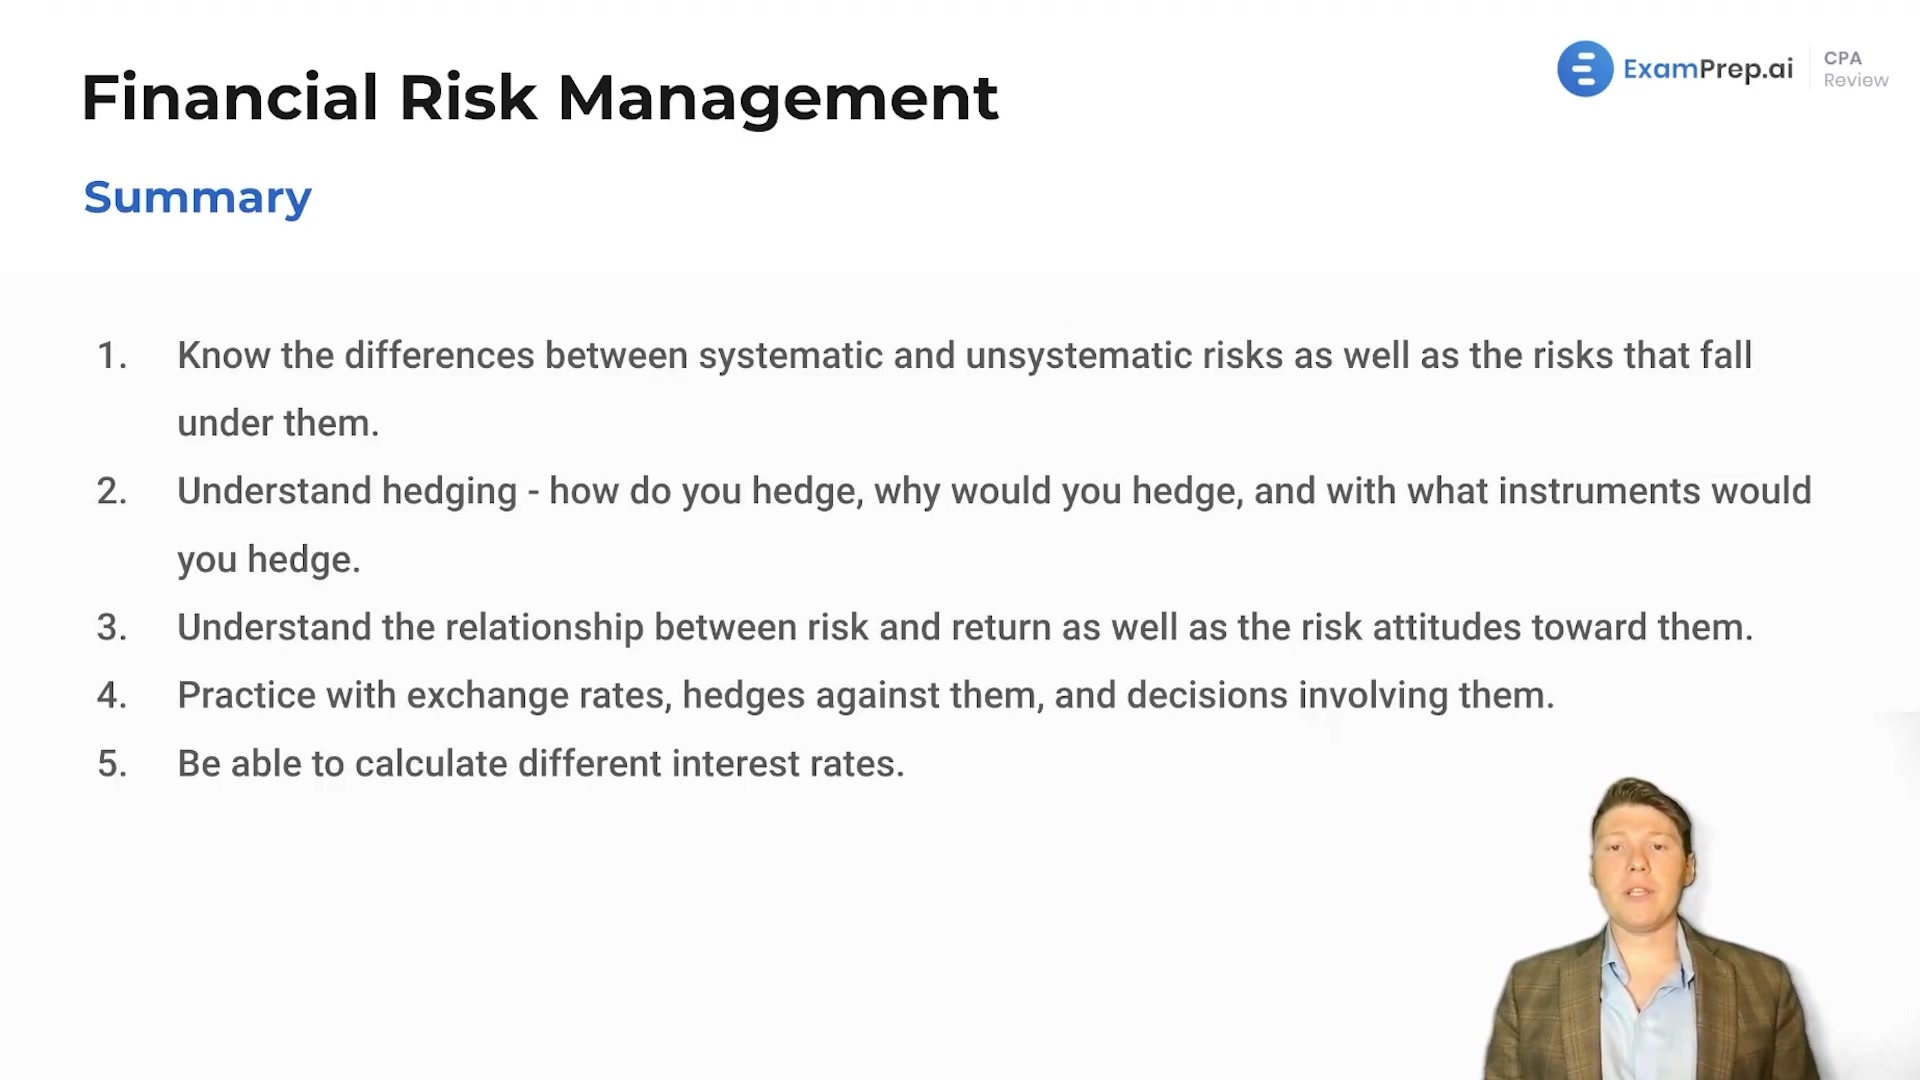 Financial Risk Management Summary lesson thumbnail